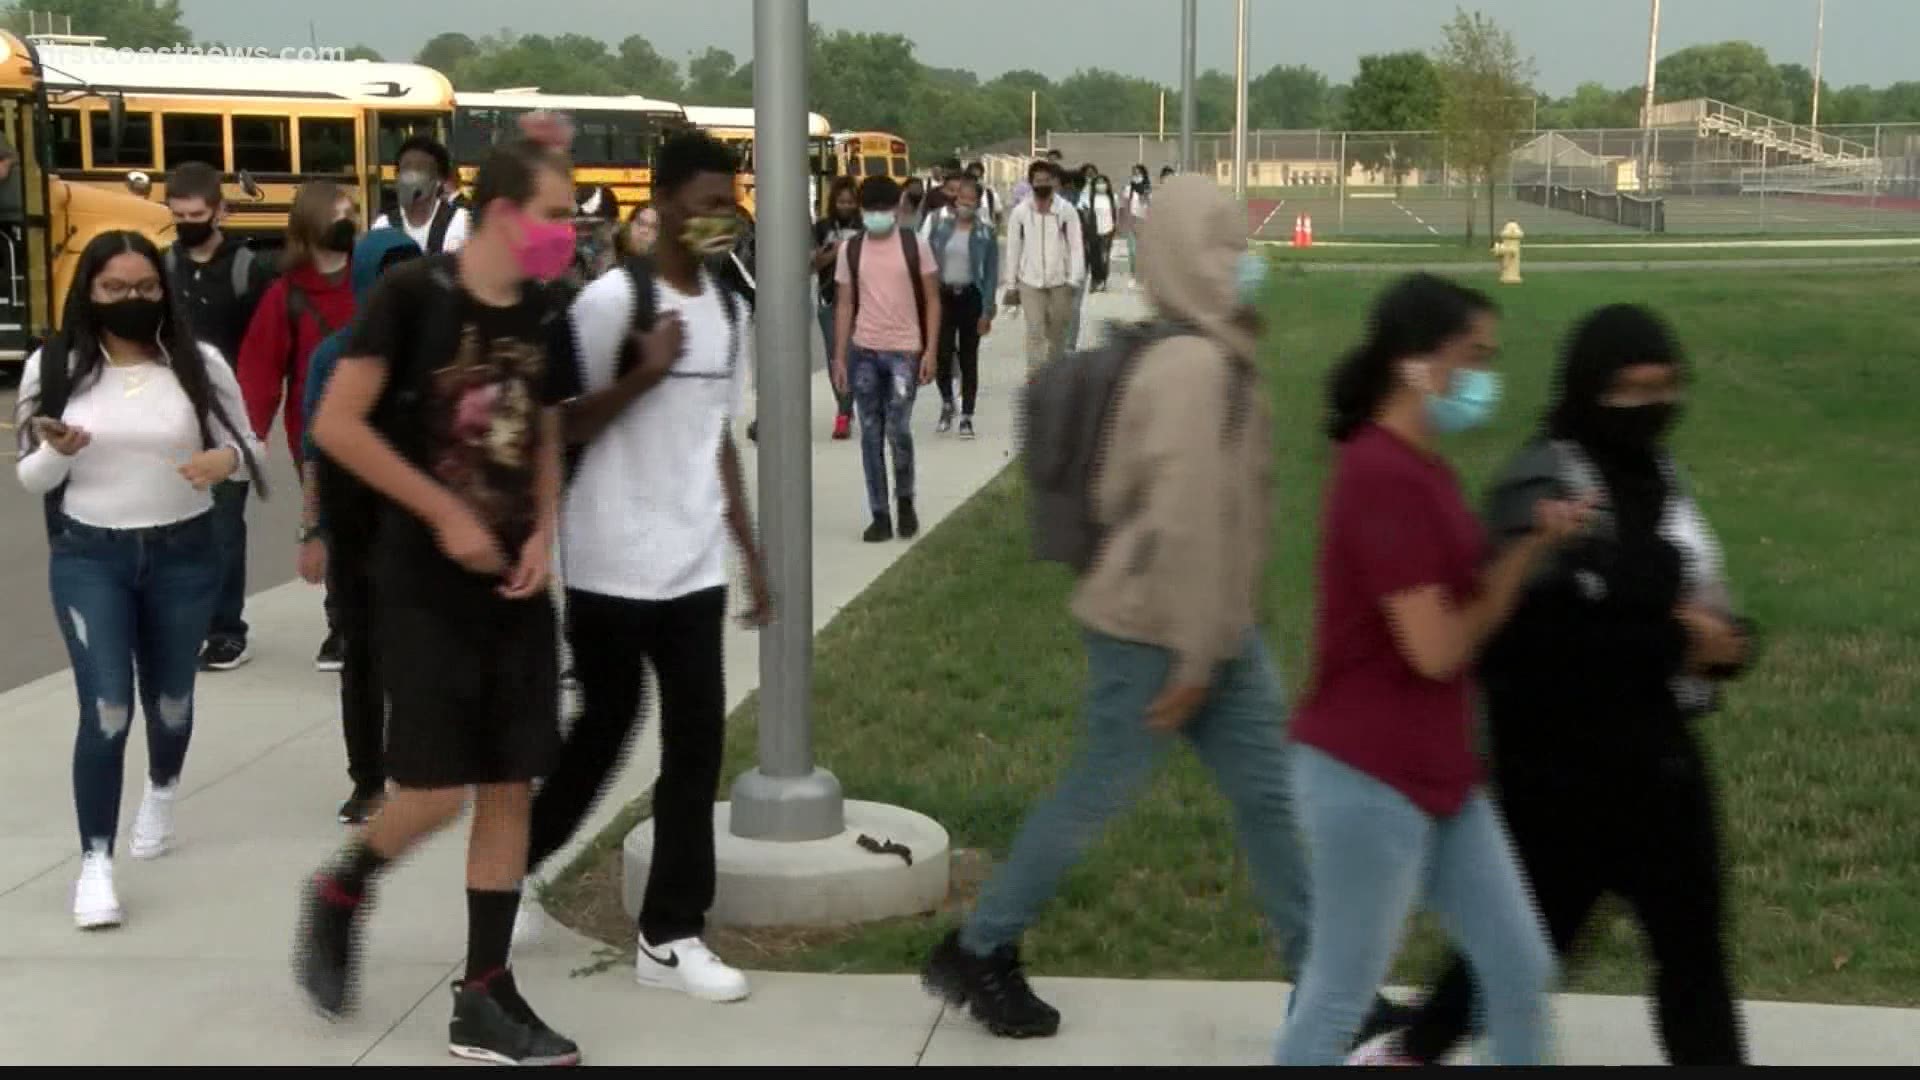 Face masks will be optional for Nassau County Schools' summer school and school-related activities through the upcoming school year.